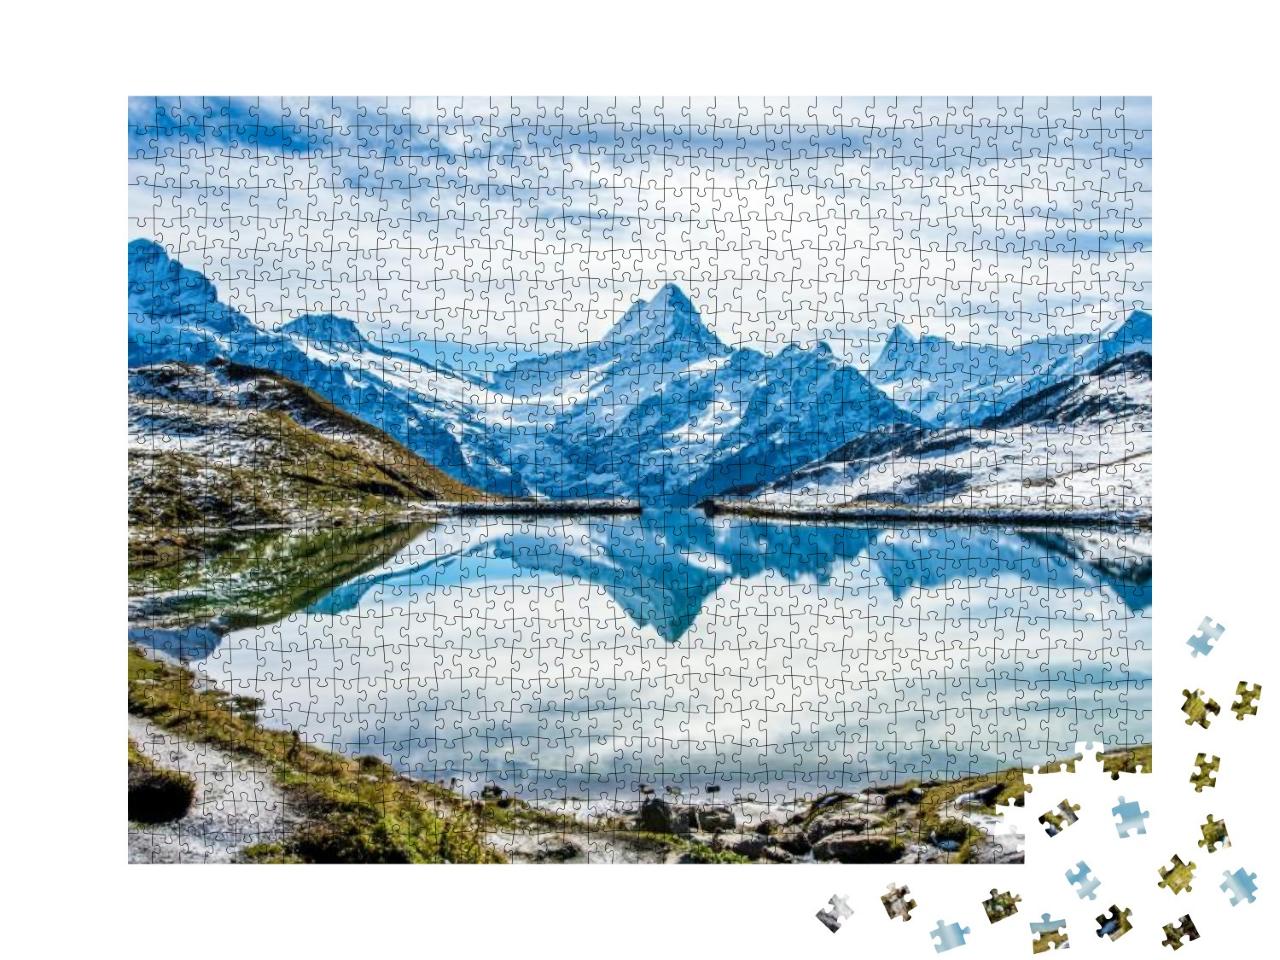 Swiss Alps Water Reflection in Bachalpsee - Mountain Lake... Jigsaw Puzzle with 1000 pieces